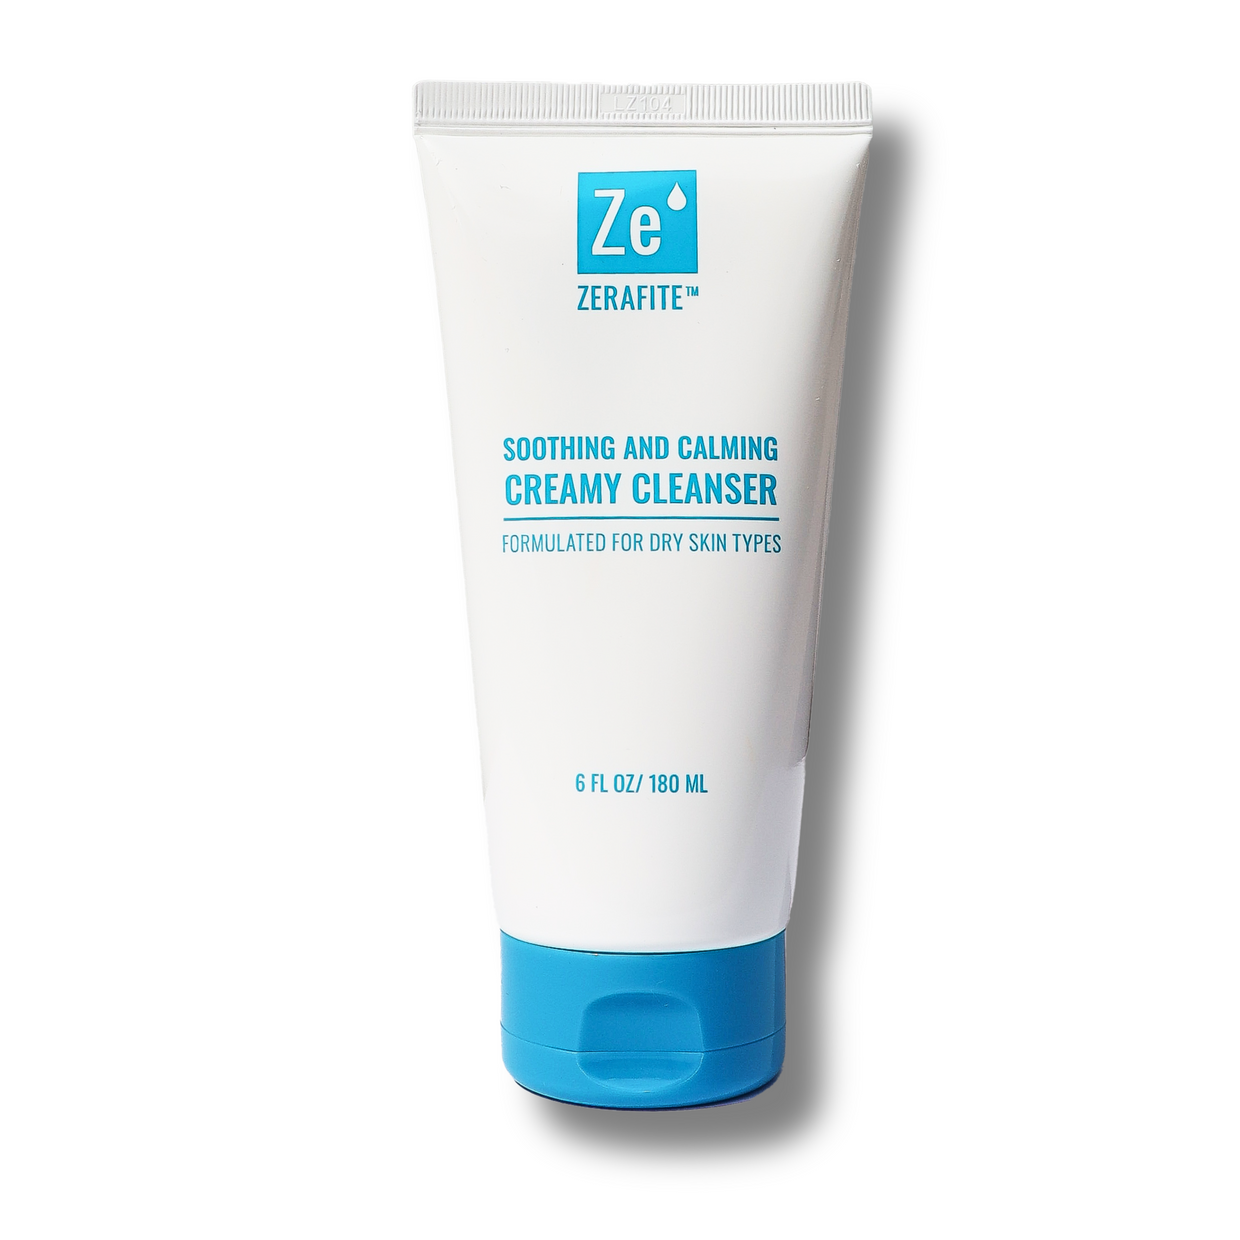 Zerafite Soothing and Calming Creamy Cleanser shop at Exclusive Beauty